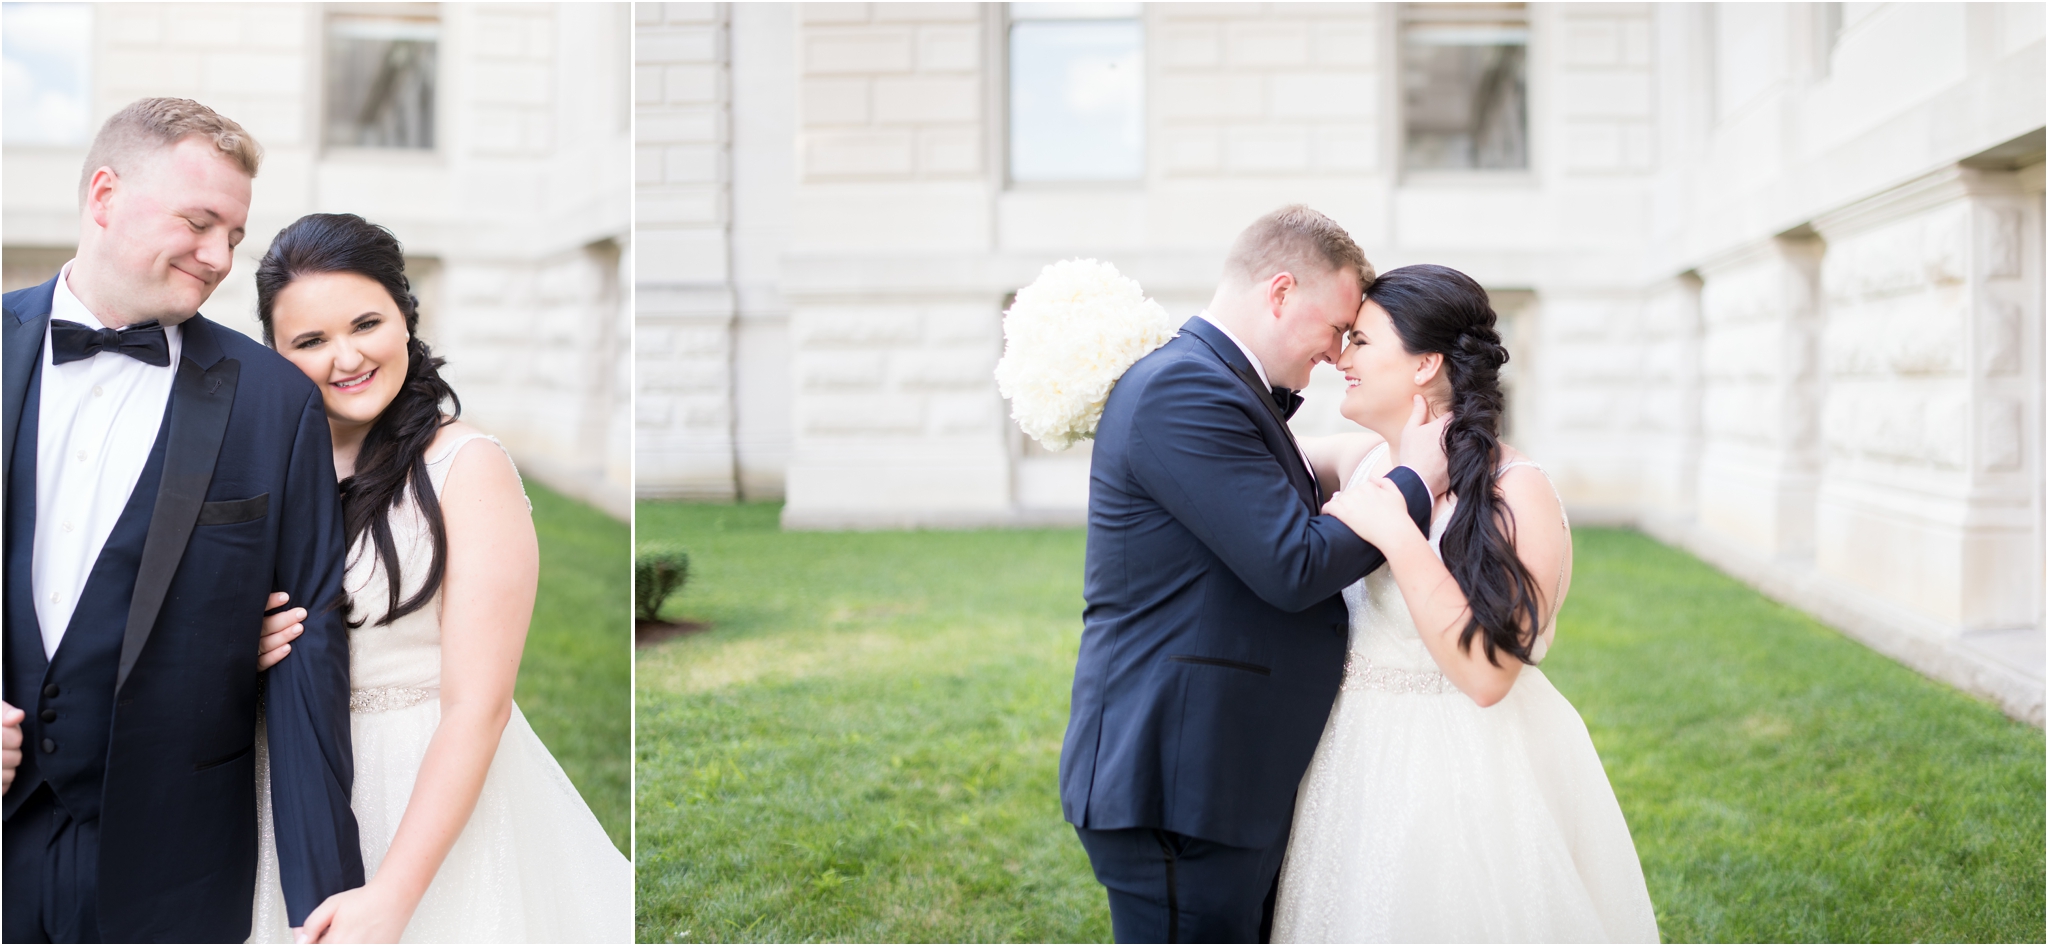 Indiana State House Ceremony | Sarah and Rachel Wedding Photographers | Indianapolis, IN | Bride and Groom Outdoor Photos